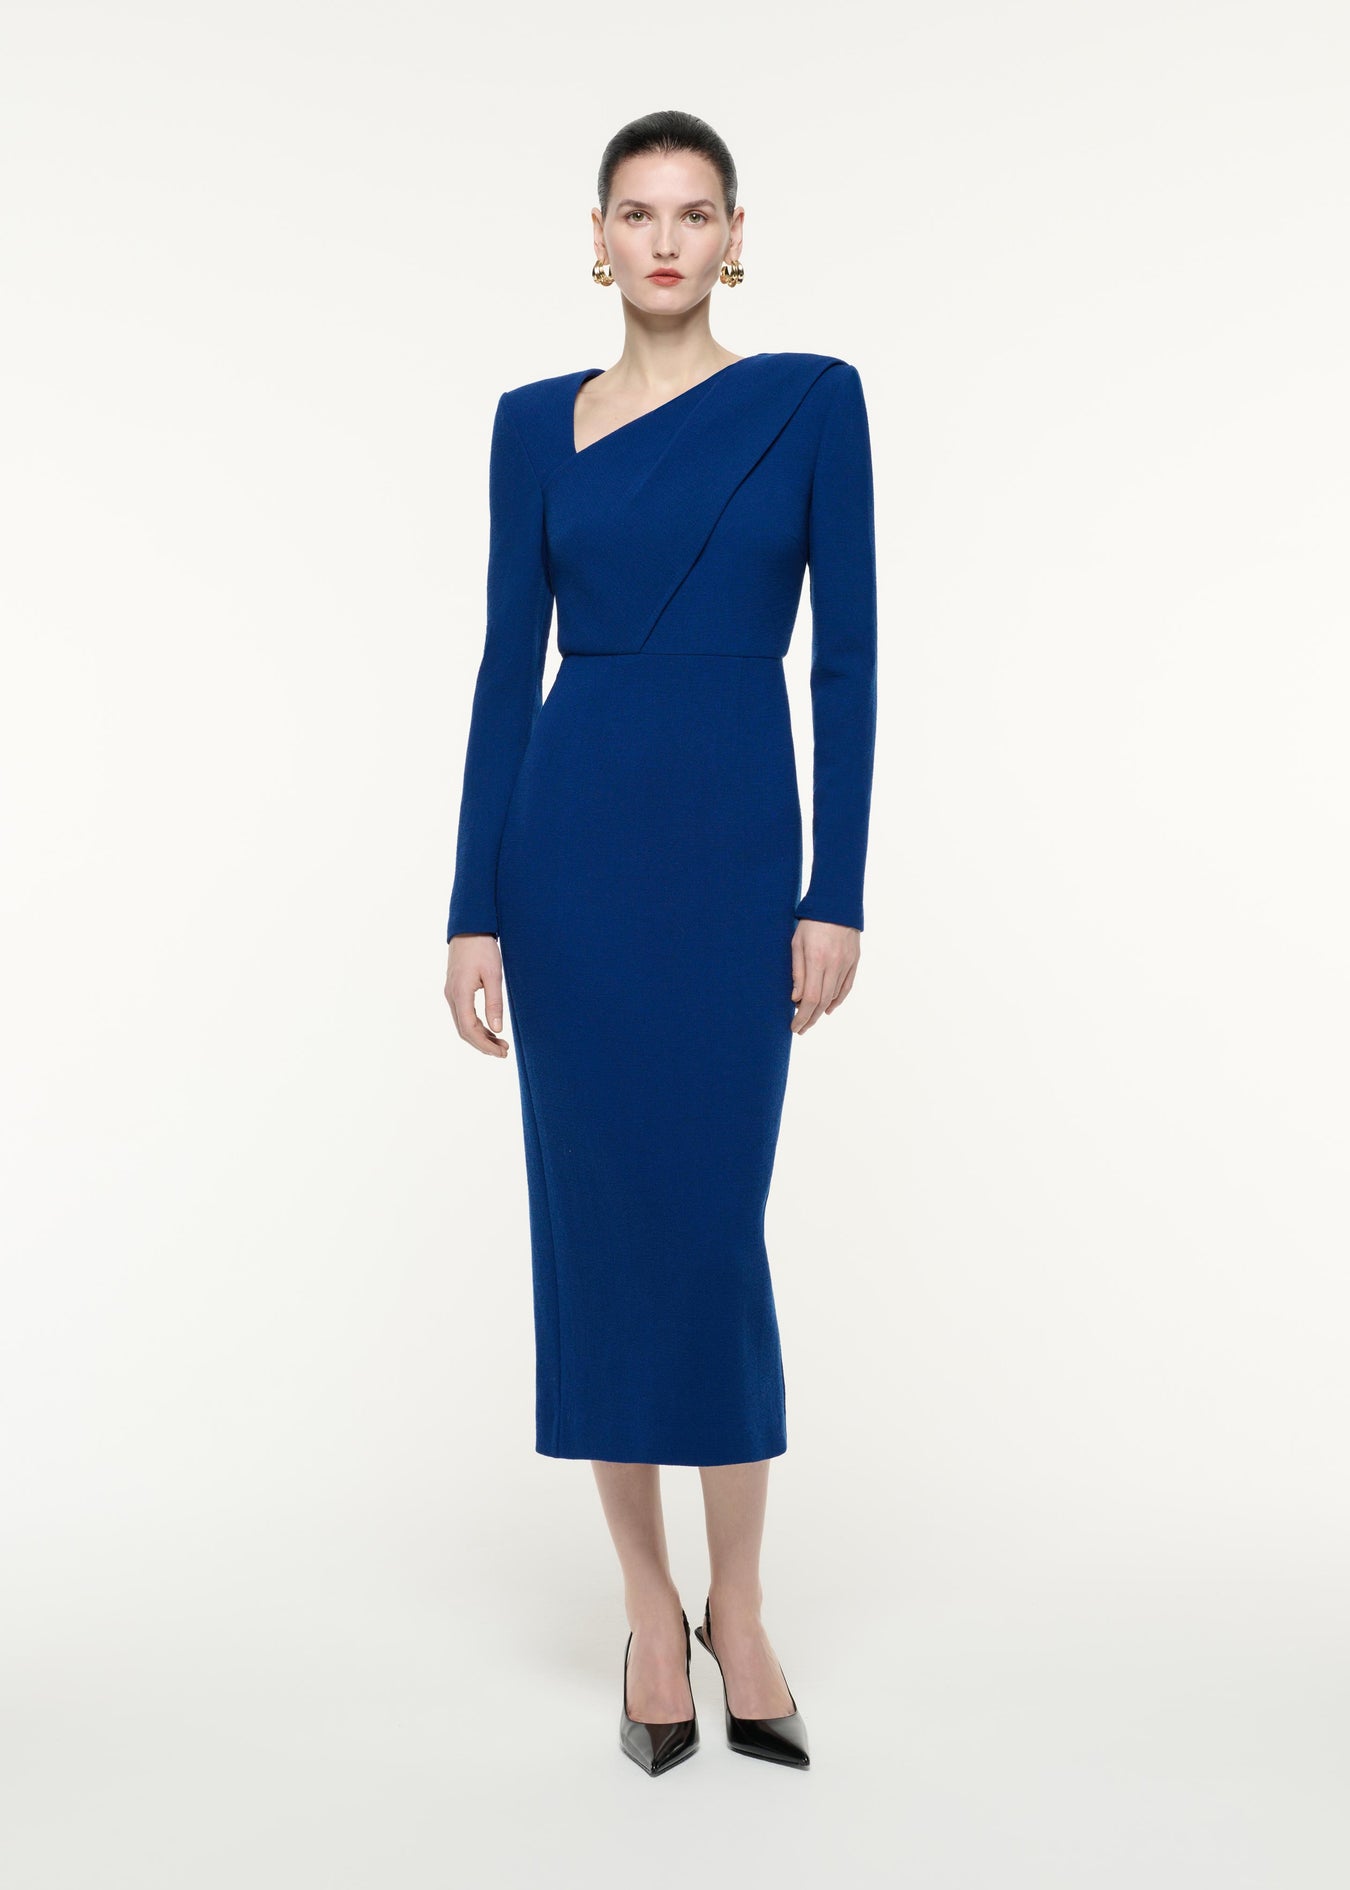 A front view image of a model wearing the Long Sleeve Wool Crepe Midi Dress in Navy